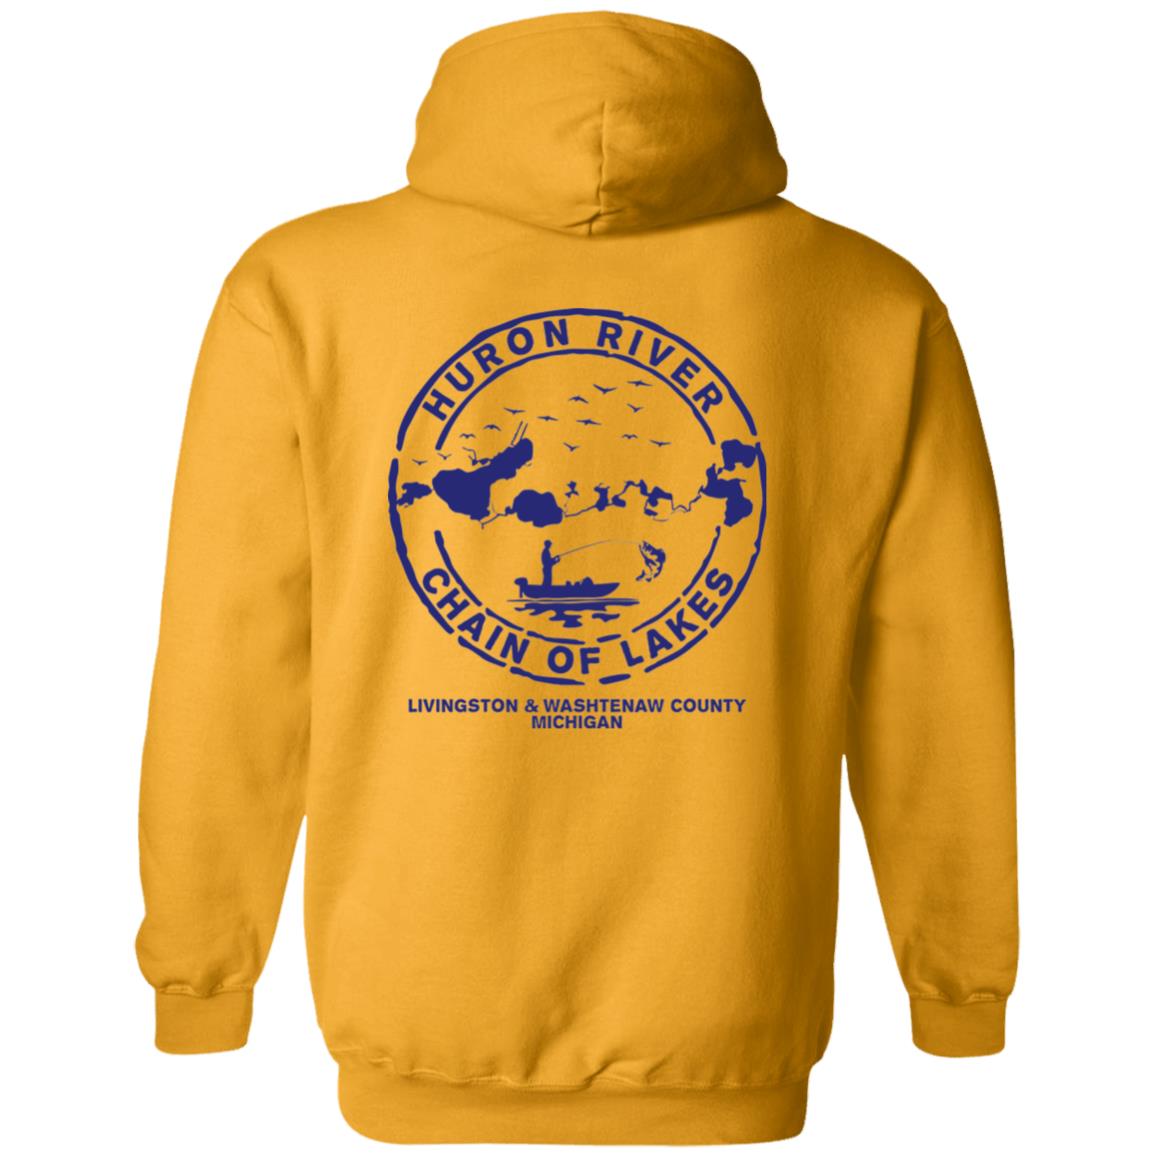 ***2 SIDED***  HRCL FL - Navy Show Me Your Bobbers I'll Show You My Pole - 2 Sided G185 Pullover Hoodie